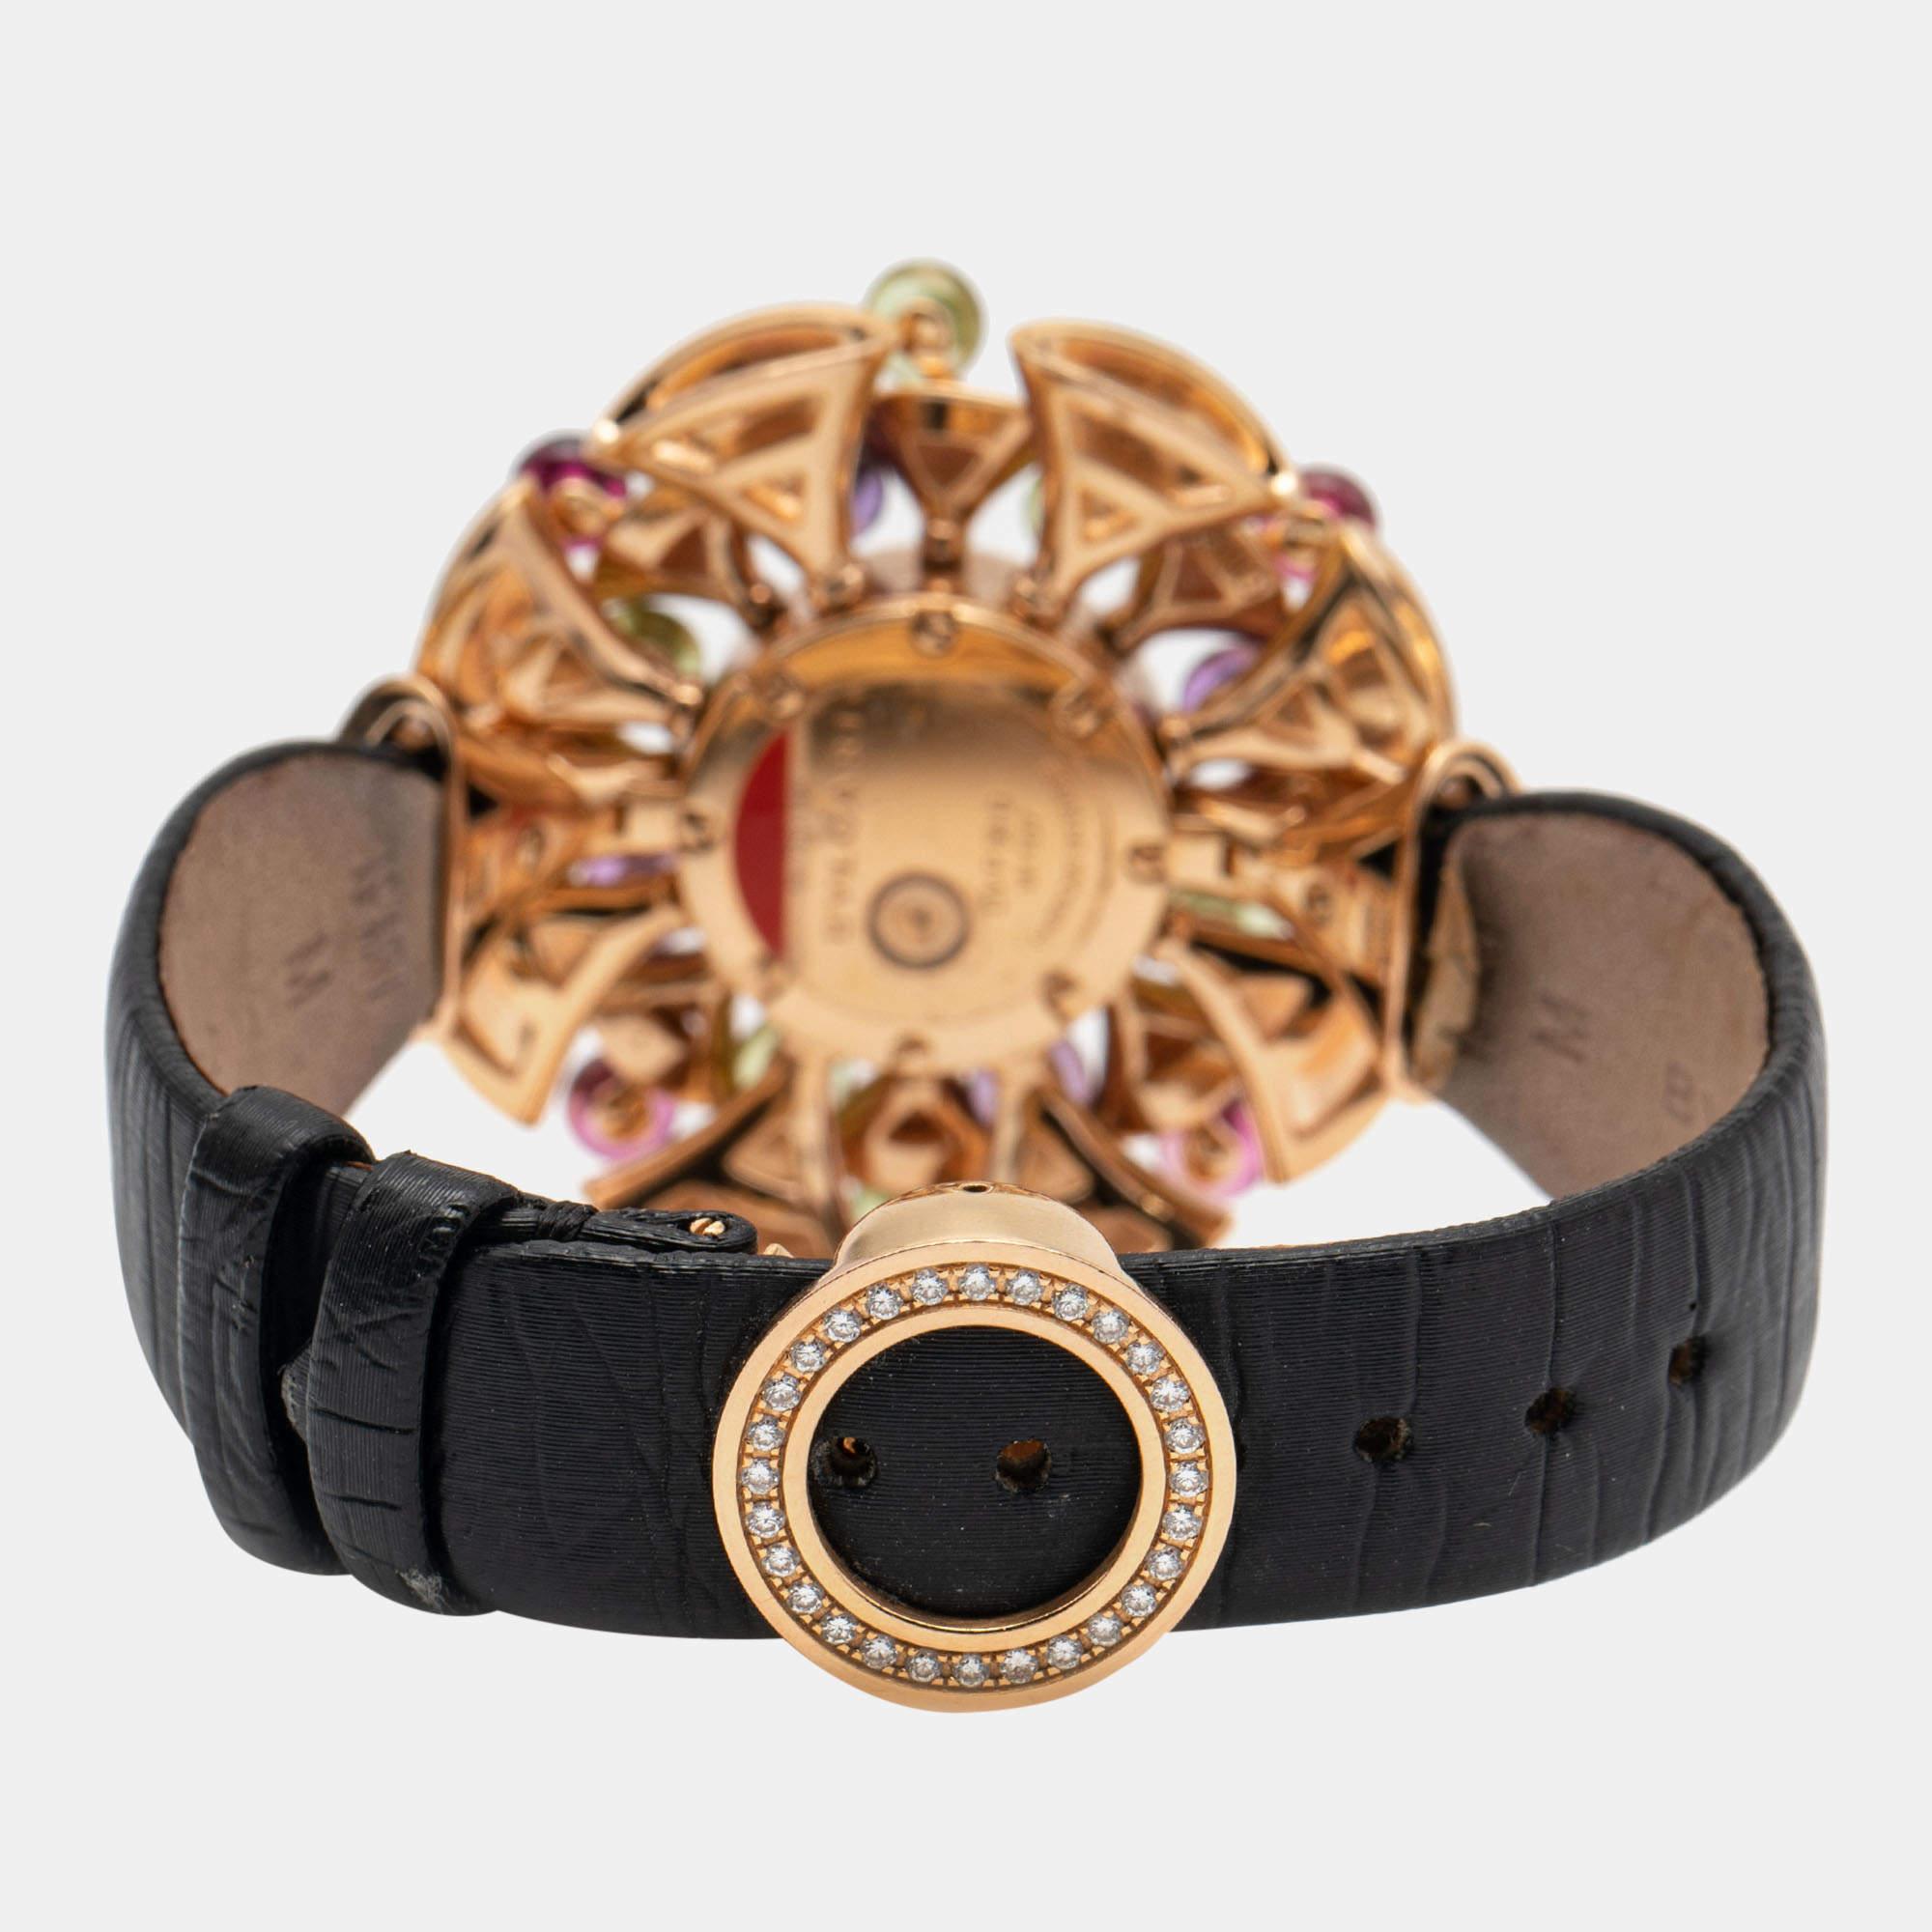 The Diva 102217 watch is an invitation to dream away with Bvlgari. It's a celebration of precious stones, of technical beauty imbued in watches, and the joyous spirit of the brand. The women's watch is set in 18k rose gold, and the magnificent case,